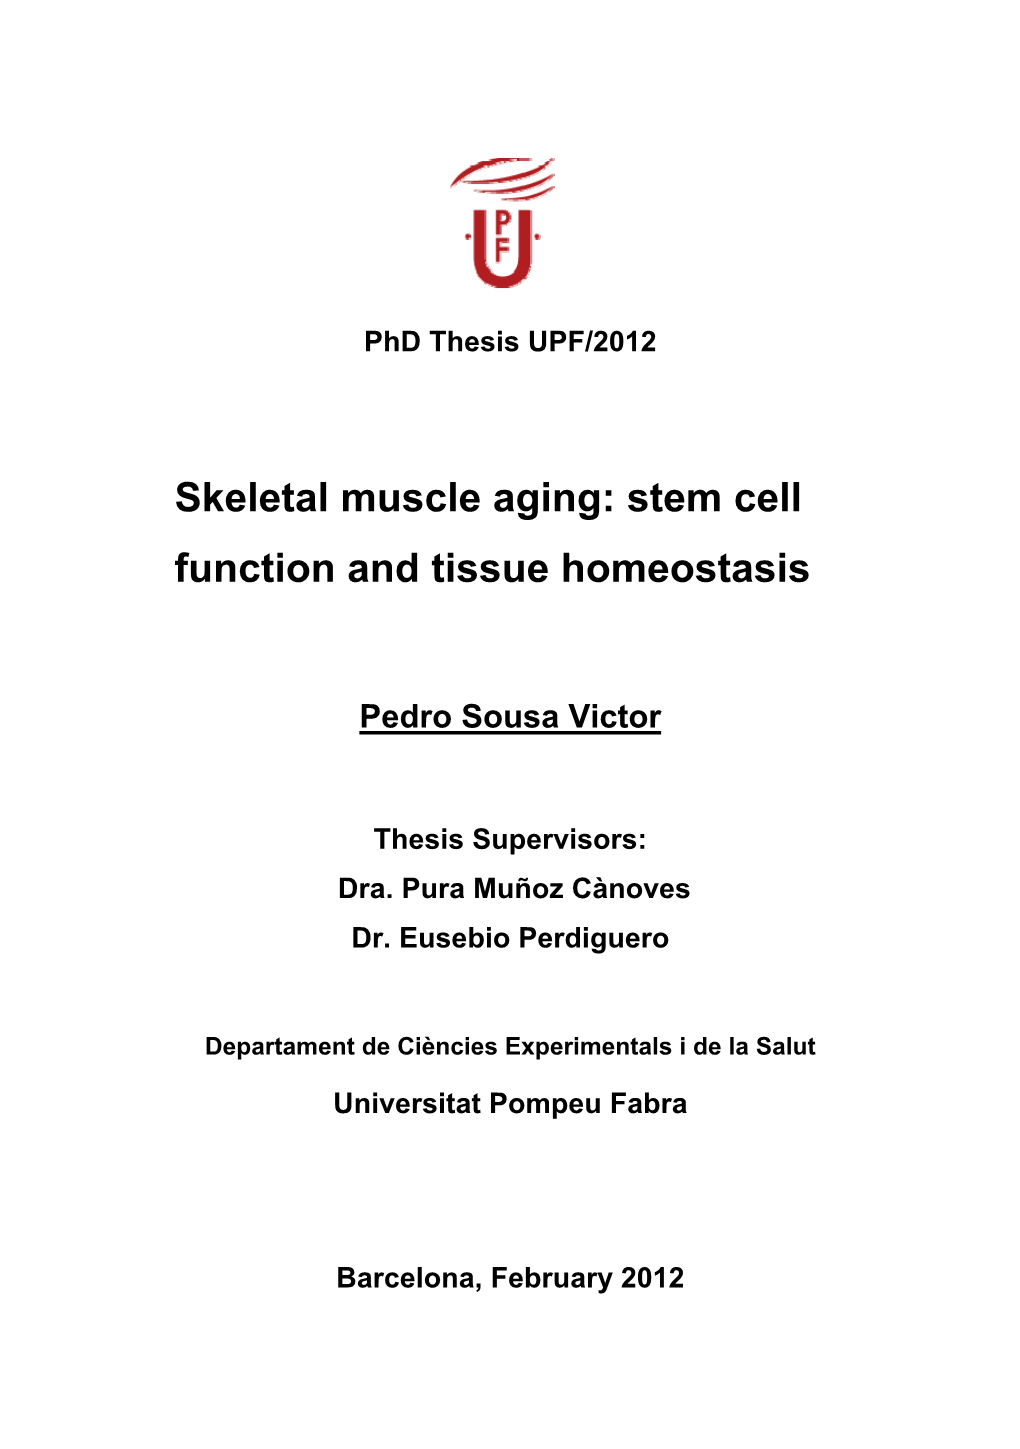 Skeletal Muscle Aging: Stem Cell Function and Tissue Homeostasis